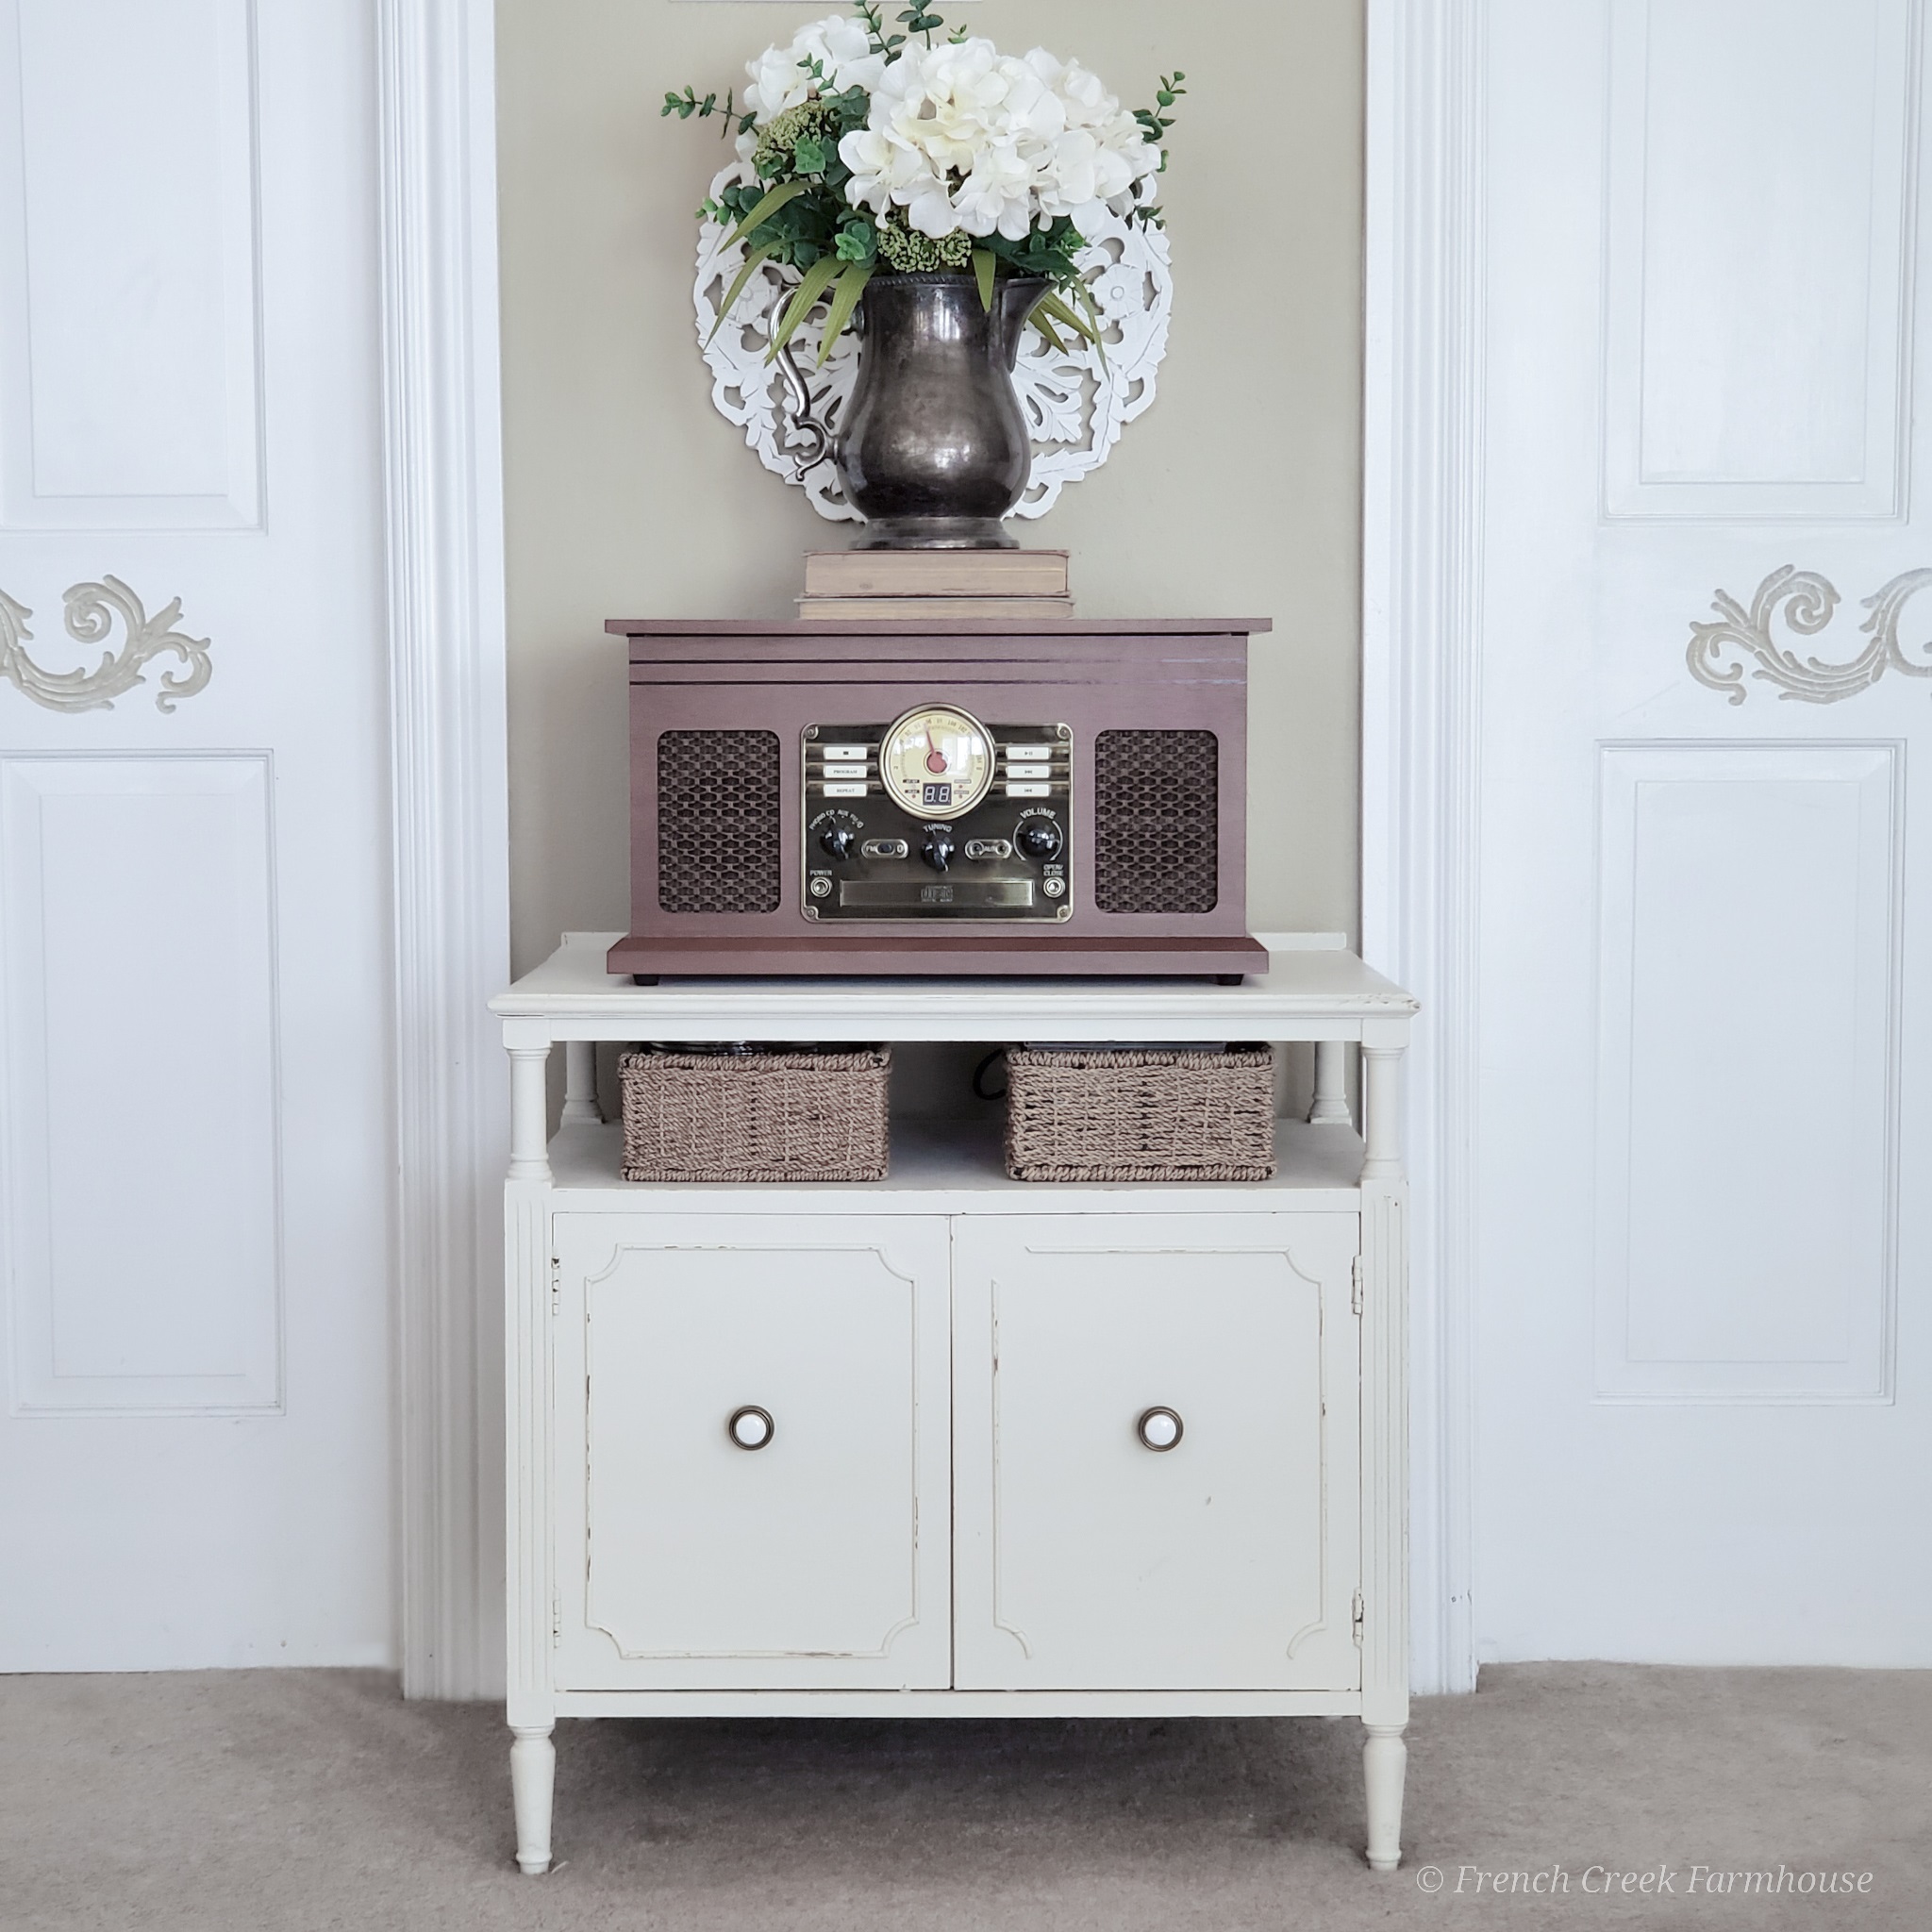 Vintage record cabinet paired with vintage-look stereo system